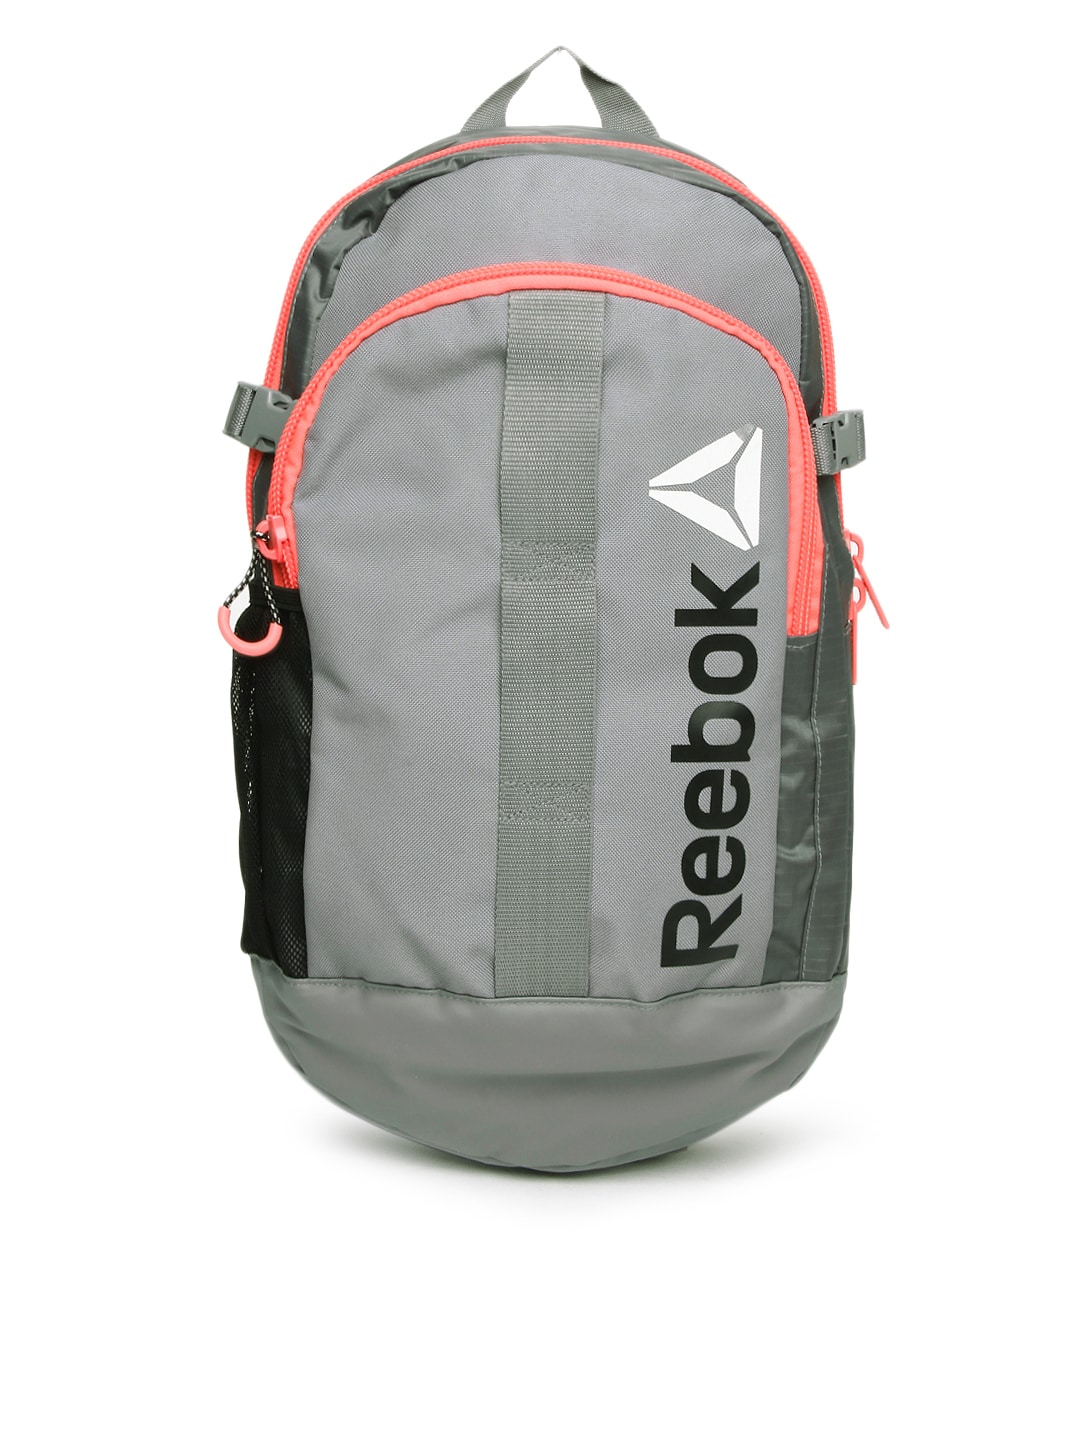 reebok backpack red,Save up to 18%,www.ilcascinone.com